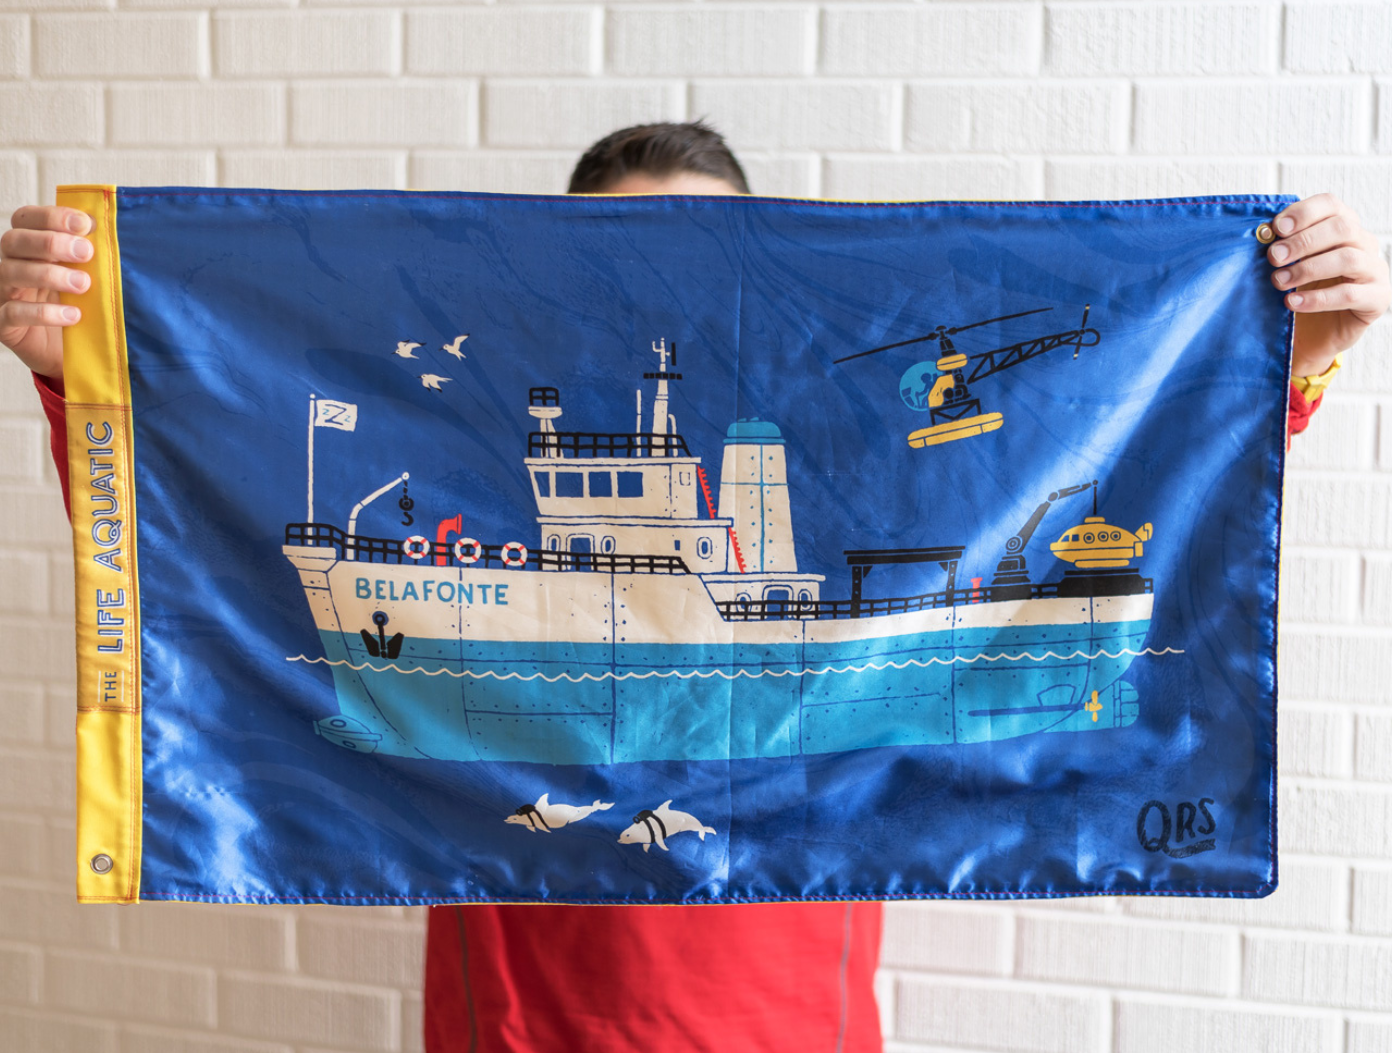 Two hands hold up a flag with a drawing of the Belafonte, the ship in the movie The Life Aquatic. Along the left edge of the flag is a yellow strip that has the movie title in all white capital letters. The ship is turquoise on the bottom half and white on the top half. A small yellow underwater research vessel is at the back of the ship and a yellow-and-black helicopter flies overhead. The front of the ship has white flag with a blue turquoise letter “Z” on it and the word “Belafonte” is in turquoise at the front of the ship.